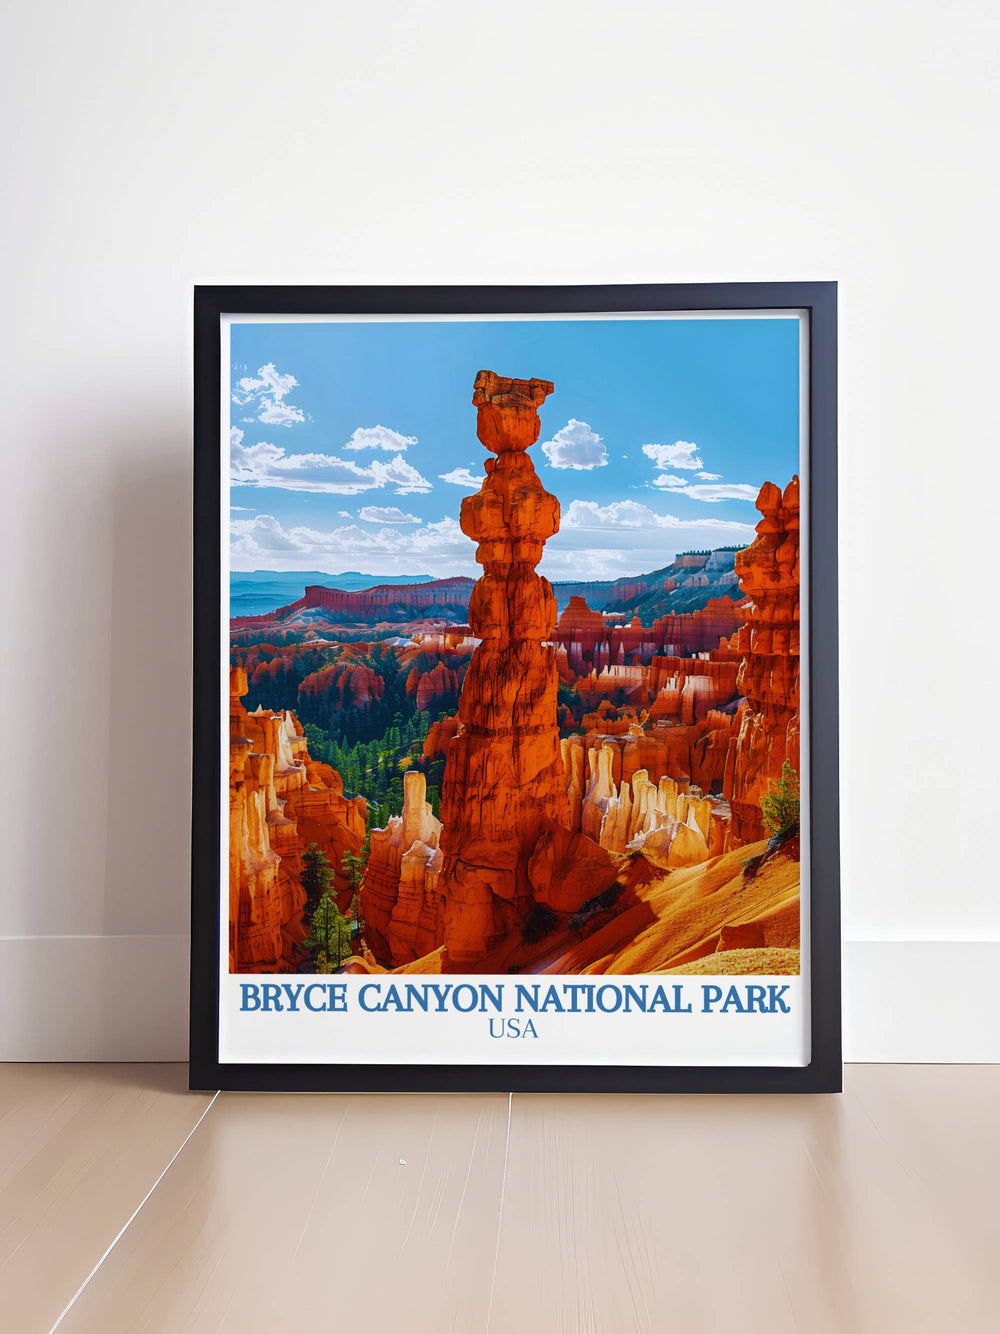 Stunning Bryce Canyon poster featuring the majestic Thors Hammer. Ideal for nature enthusiasts looking to bring the outdoors inside. High quality print designed to last with vibrant colors and intricate details.